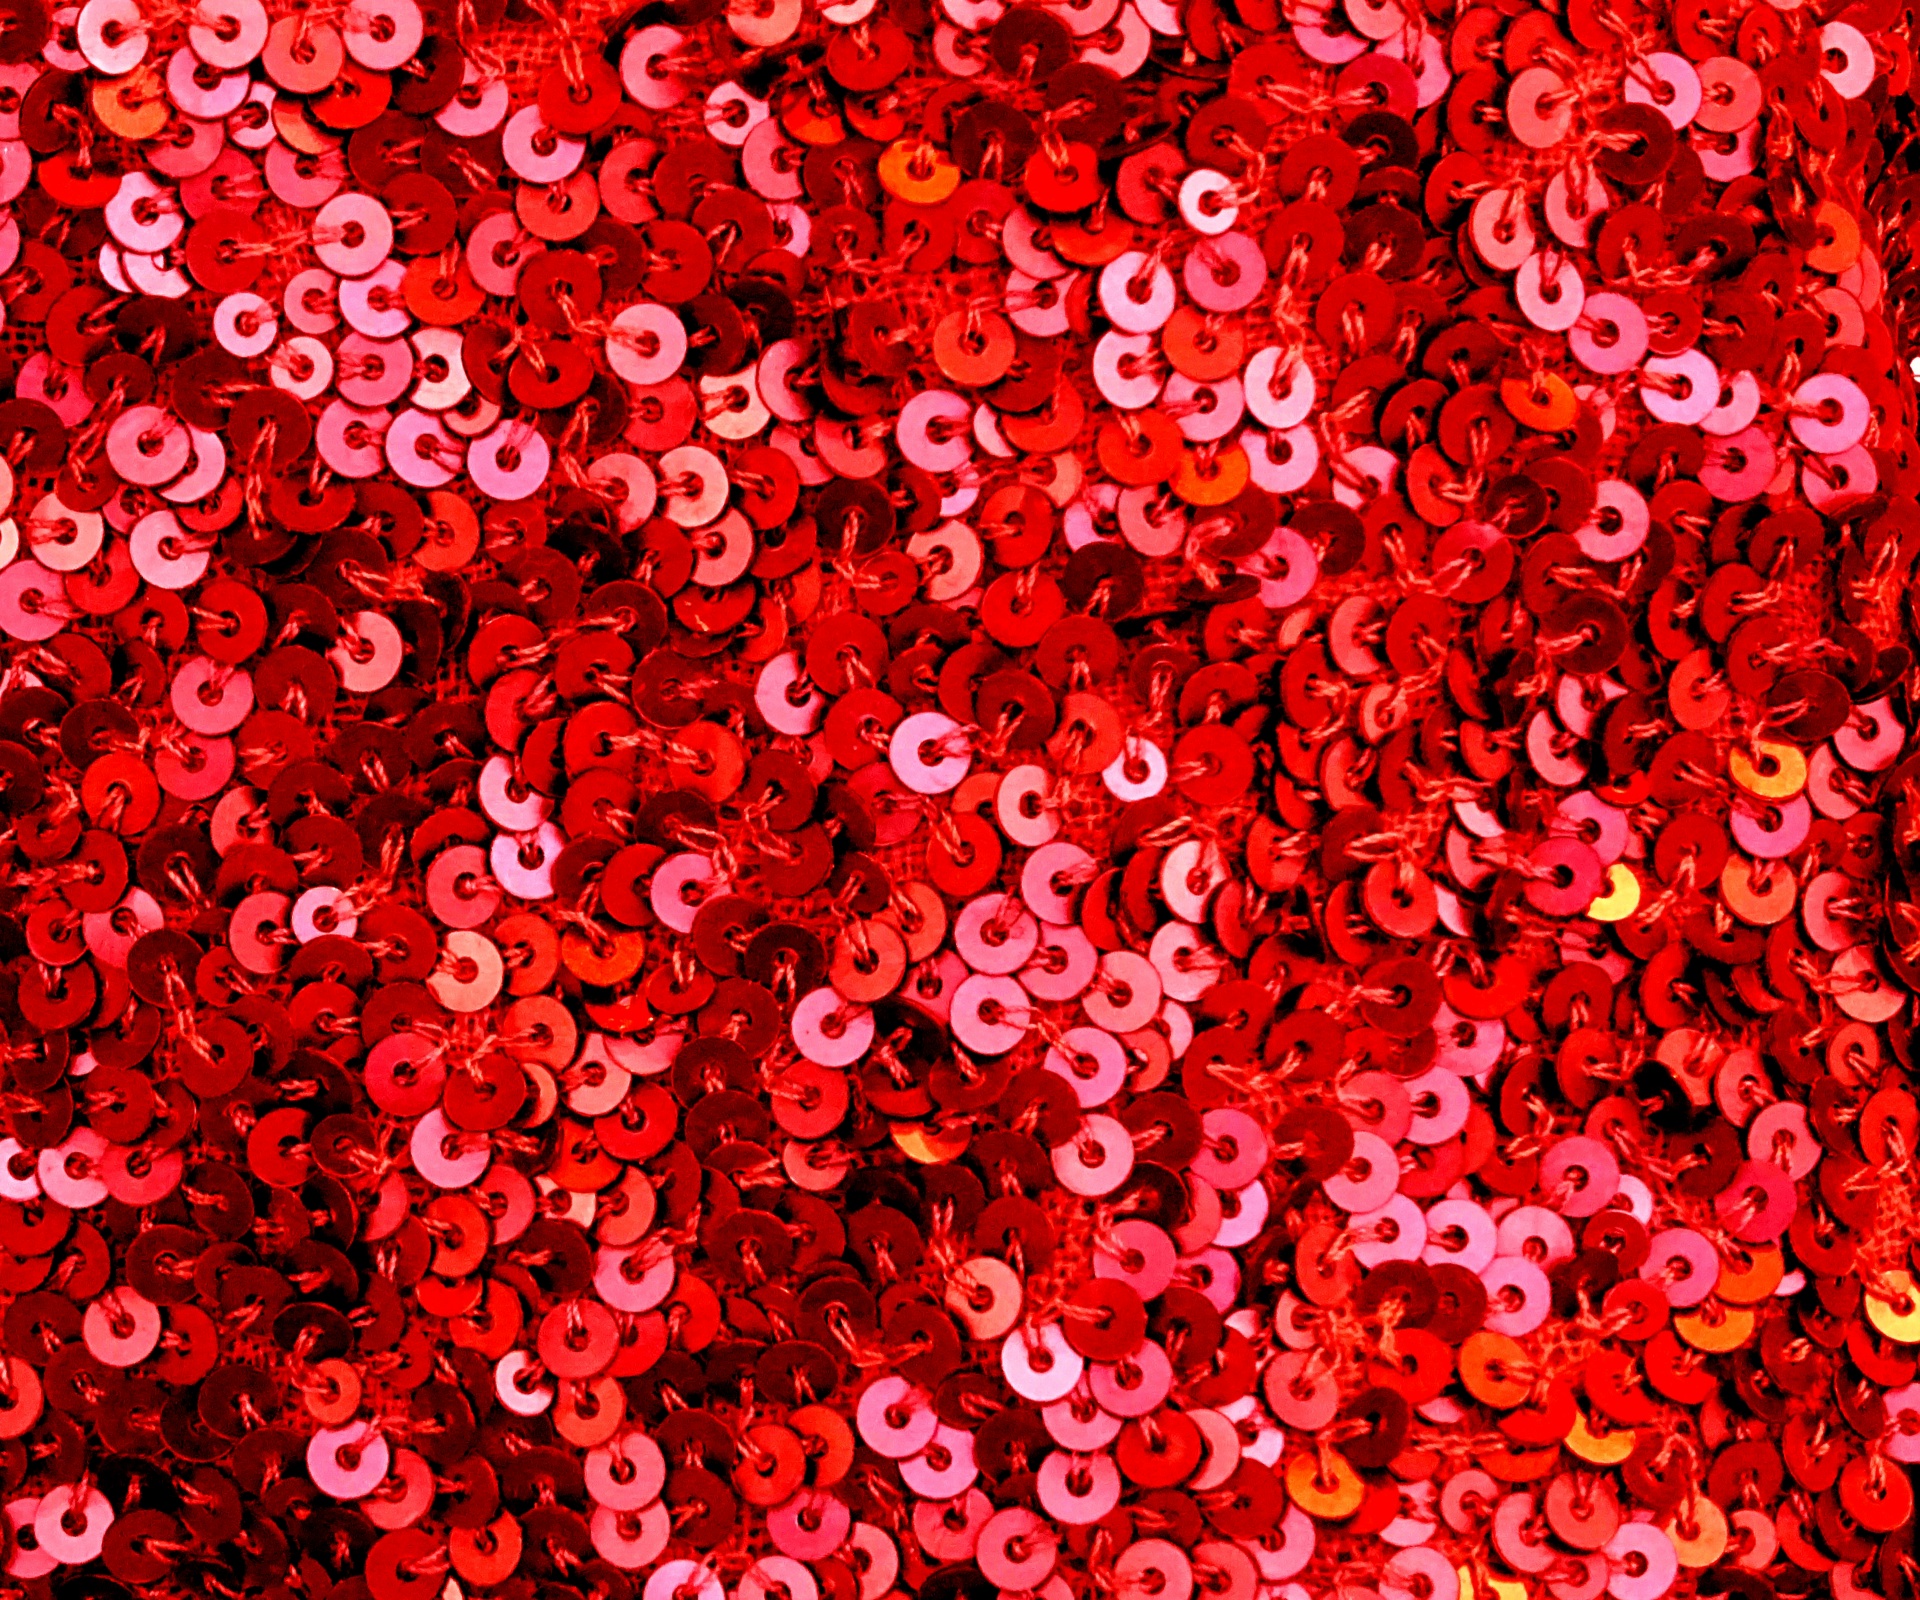 Red Sequins Background Free Stock Photo Public Domain HD Wallpapers Download Free Images Wallpaper [wallpaper981.blogspot.com]